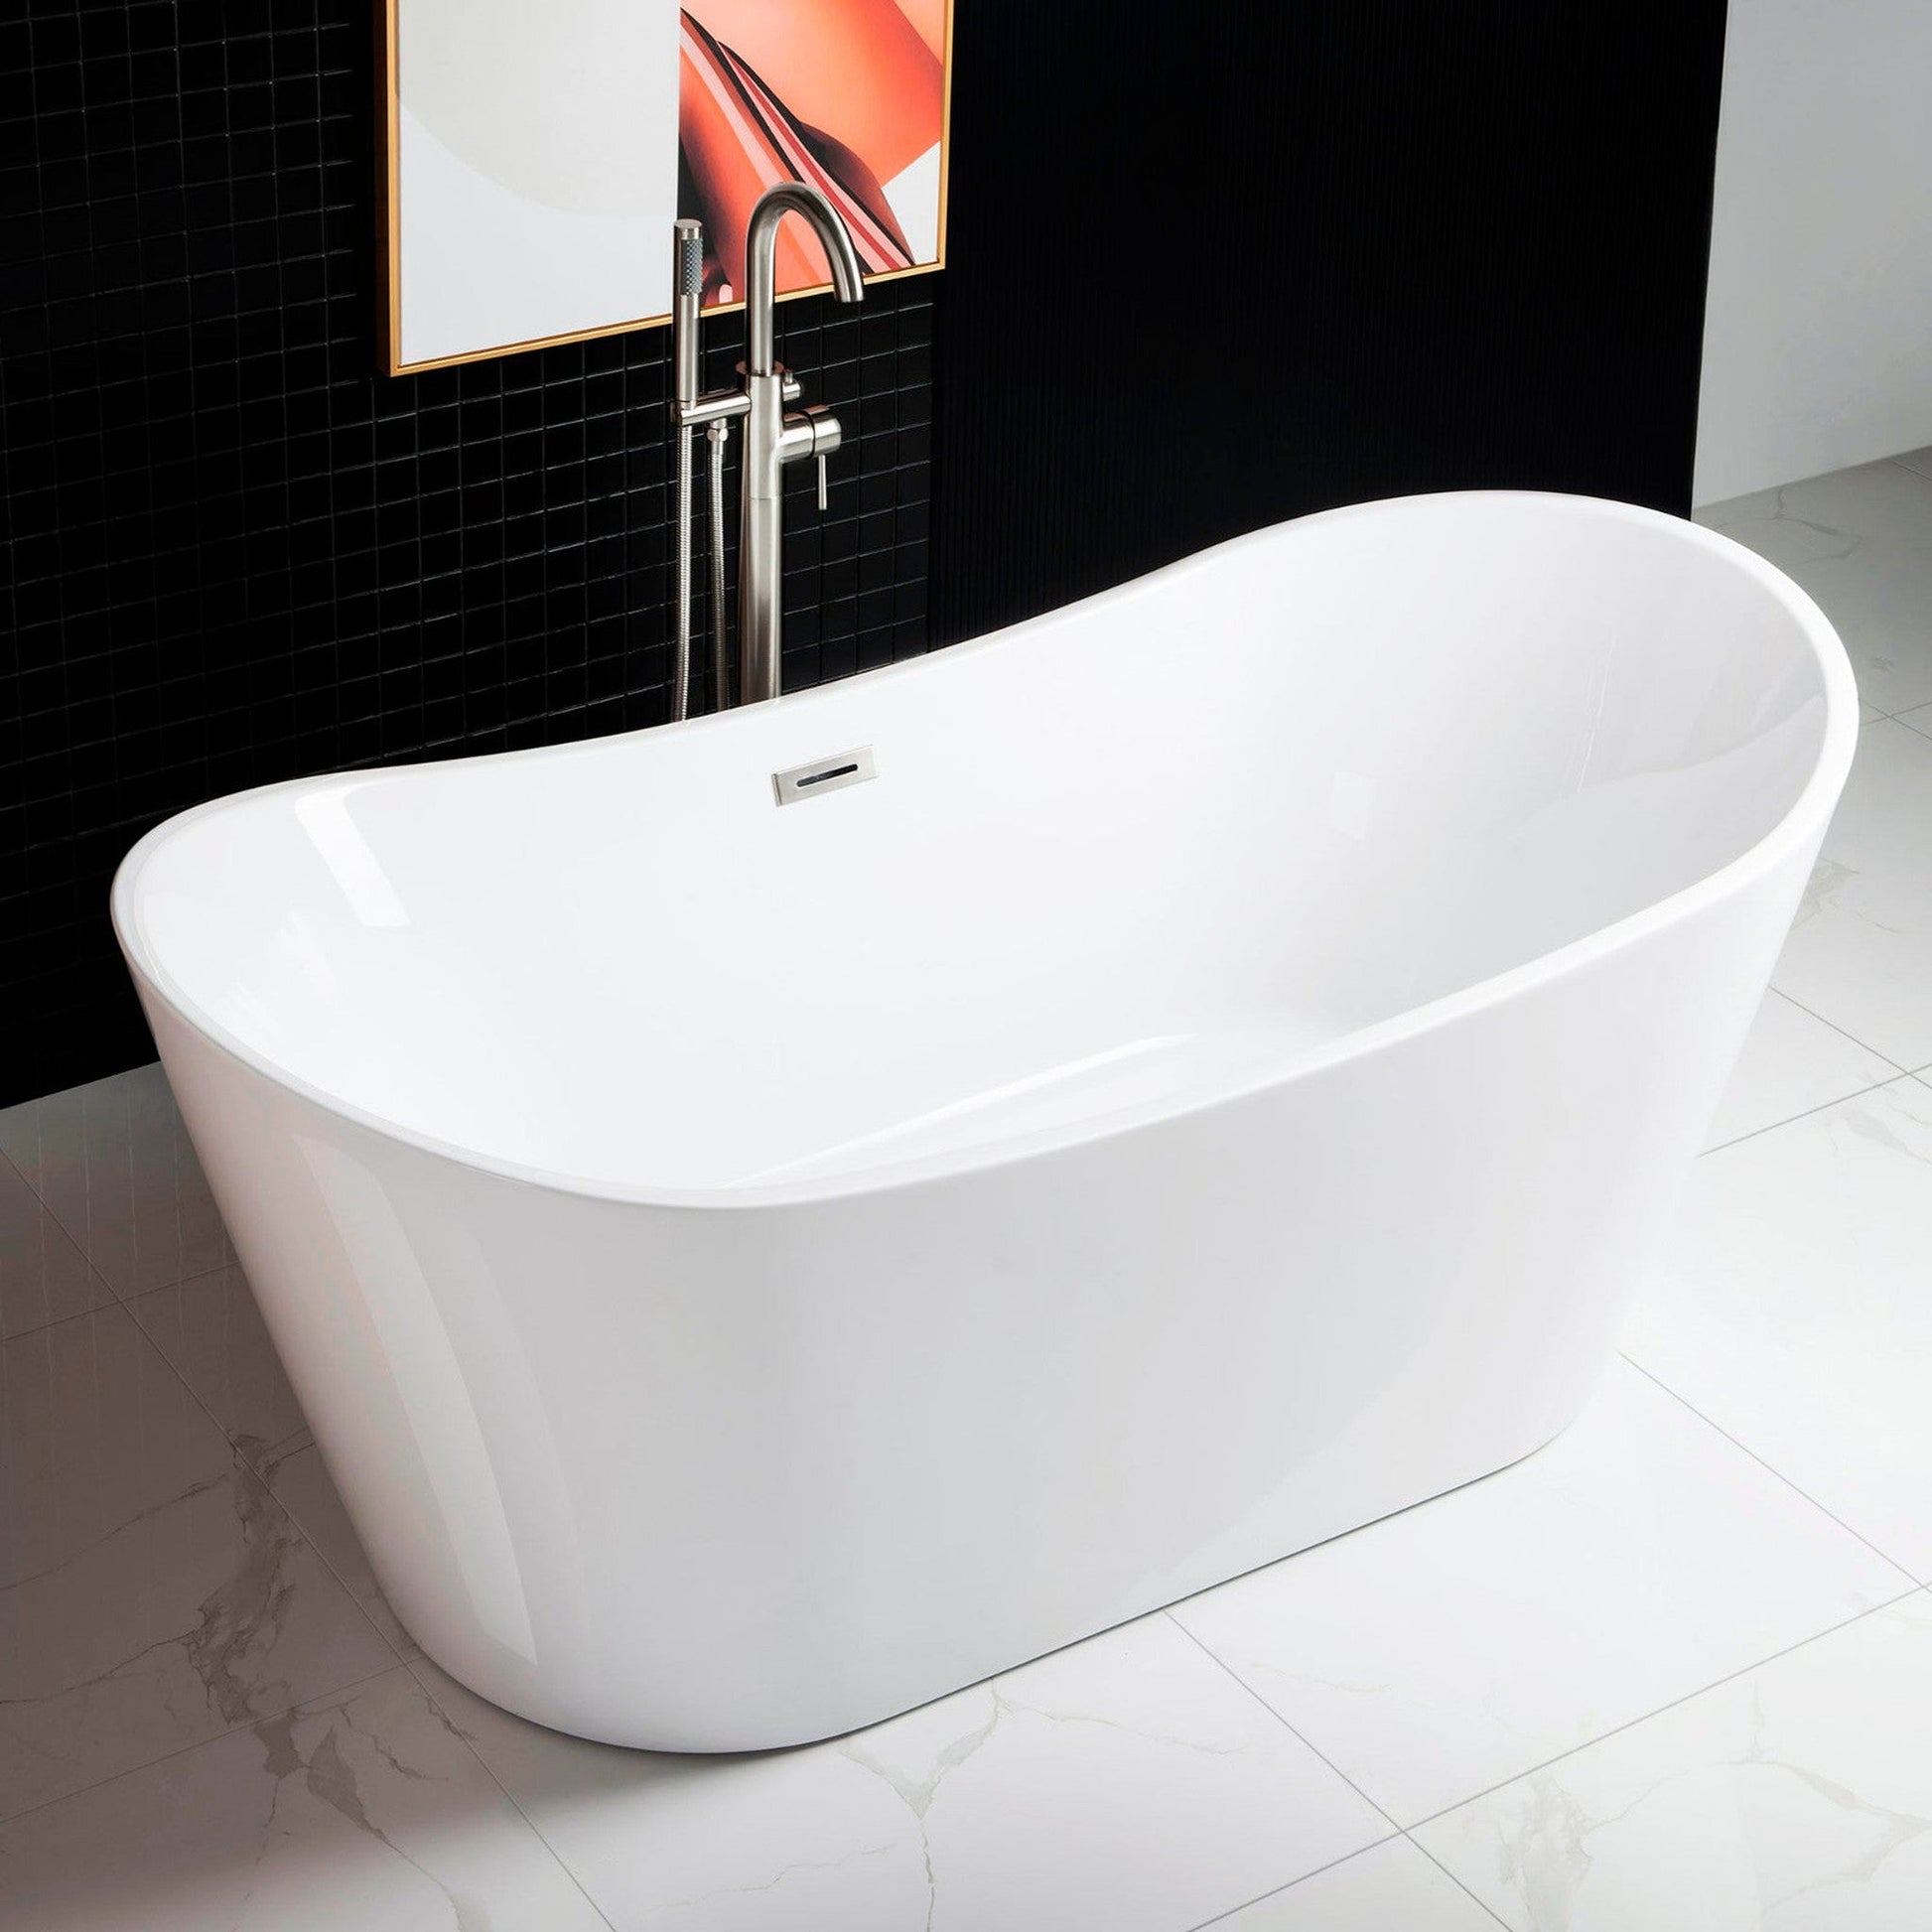 WoodBridge B0010 67" White Acrylic Freestanding Contemporary Soaking Bathtub With Chrome Drain, Overflow, F0071CHSQ Tub Filler and Caddy Tray